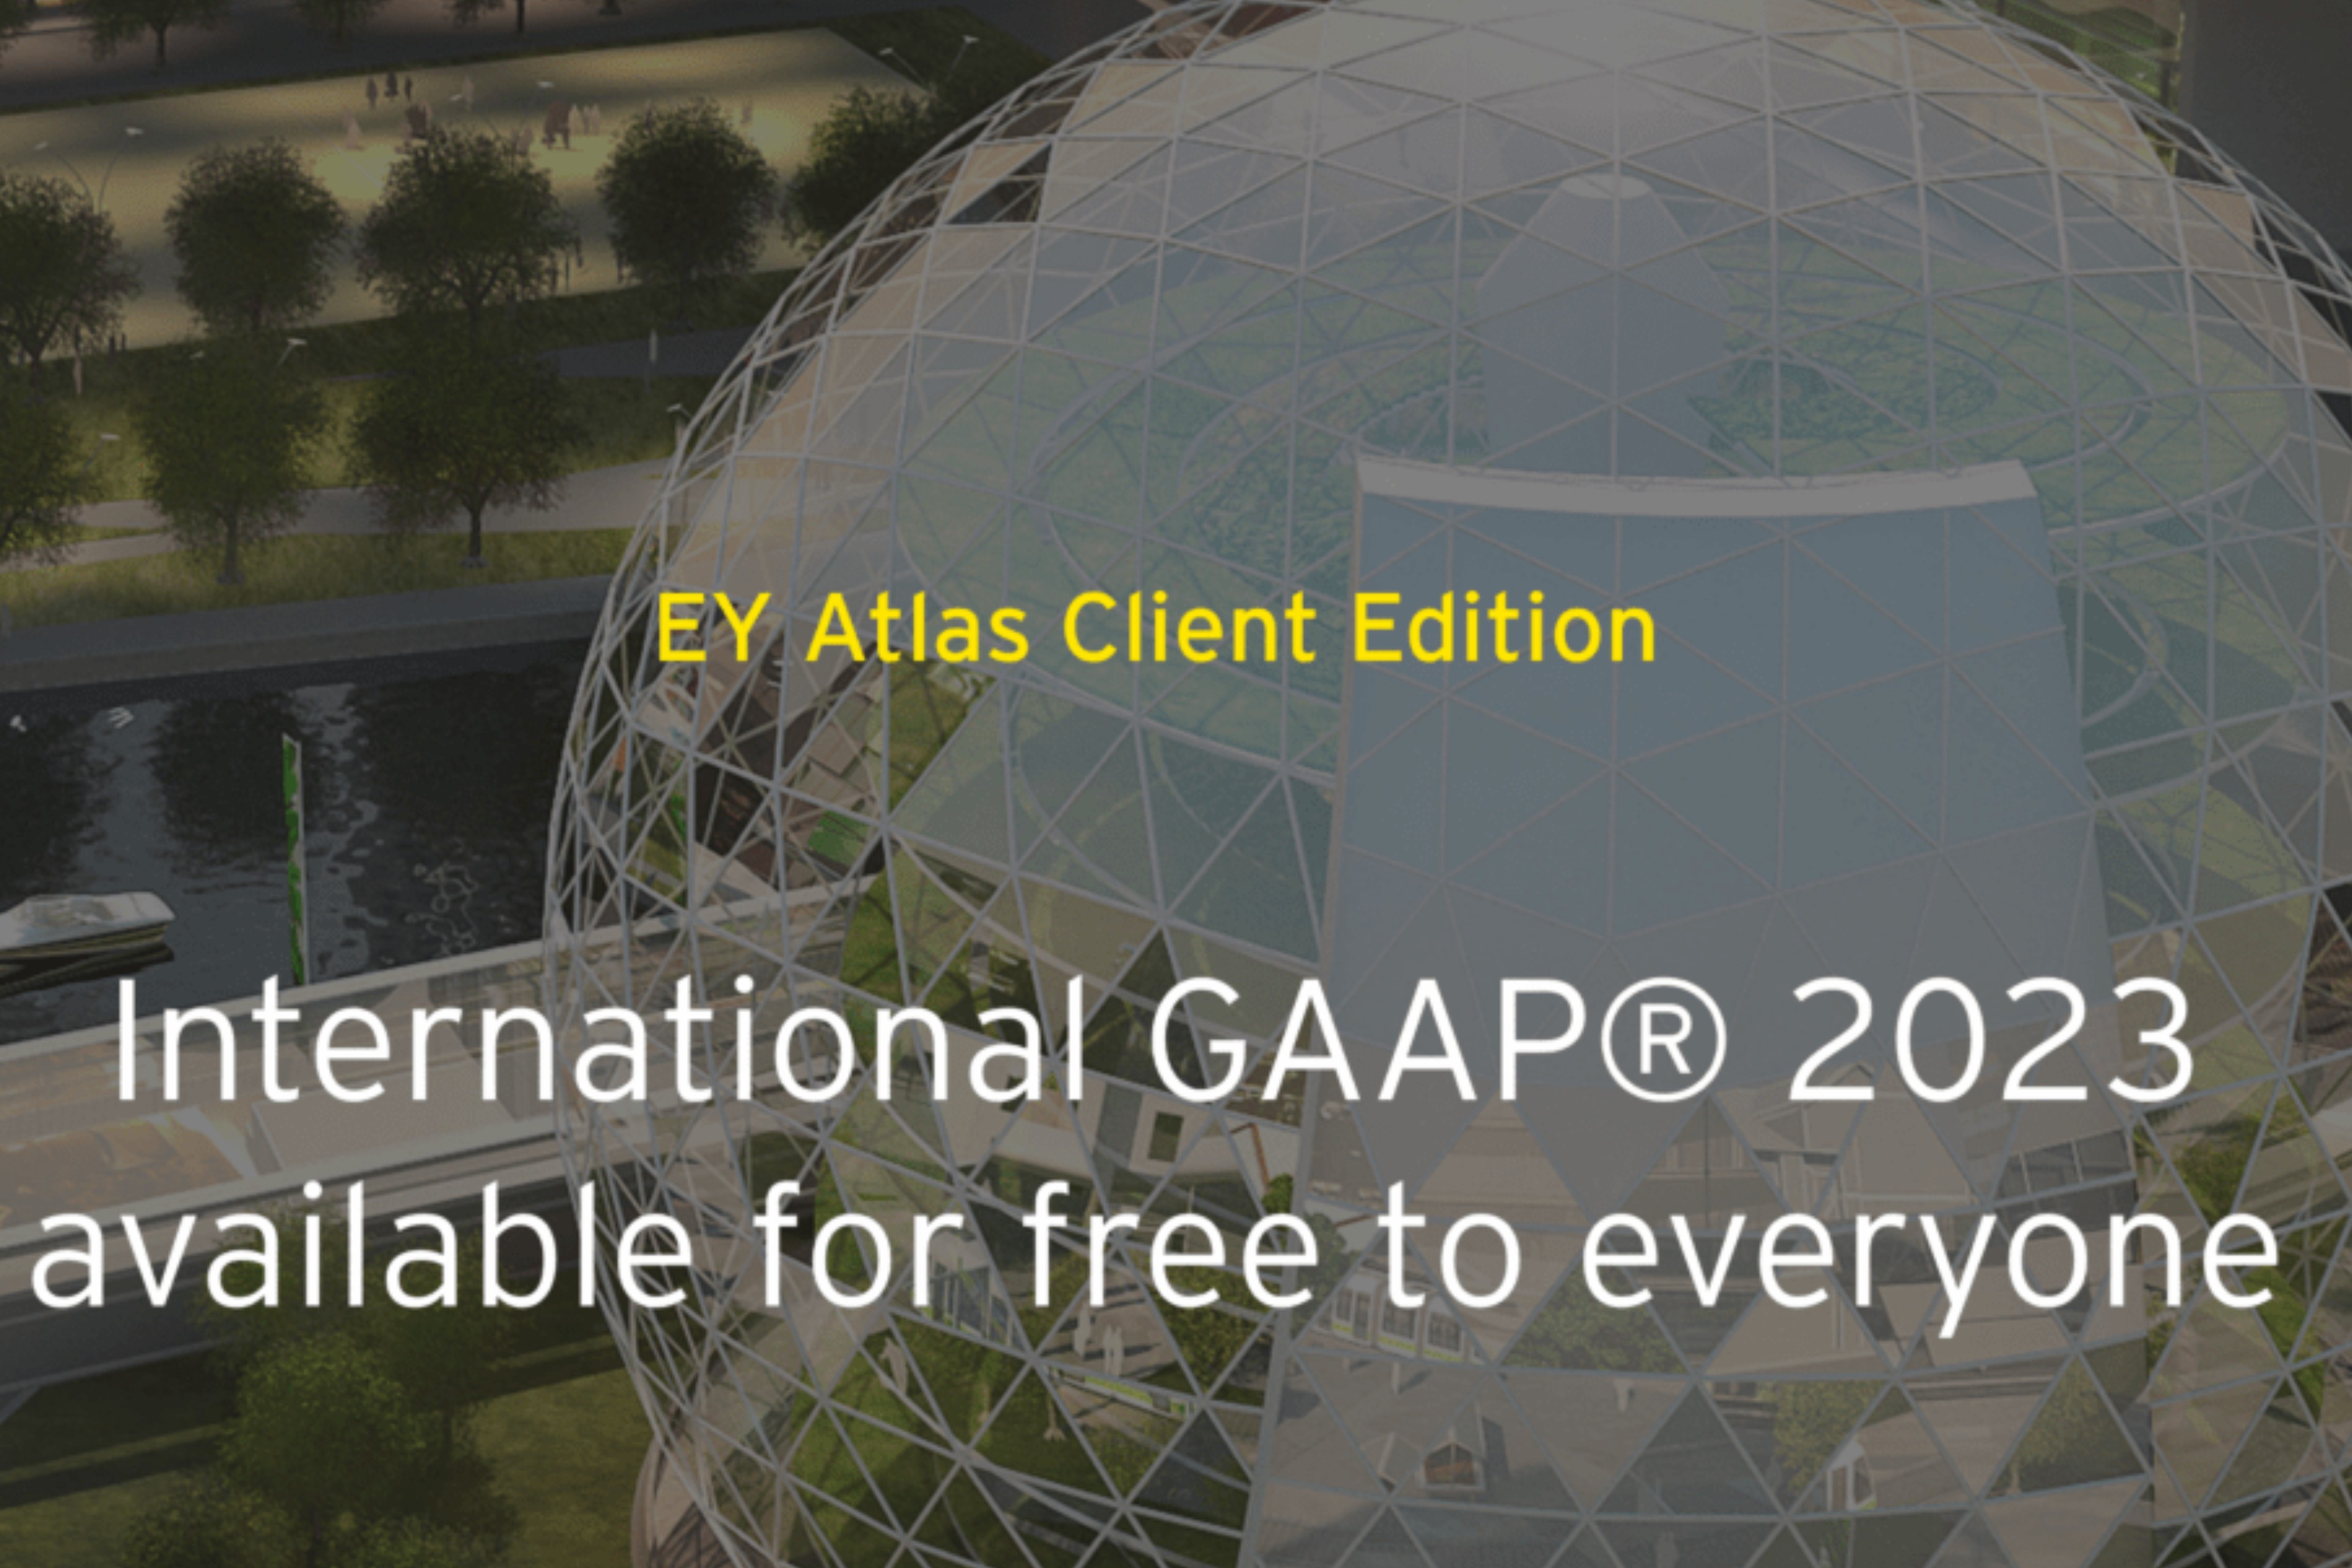 EY’s International GAAP® 2023, is now available online free of charge